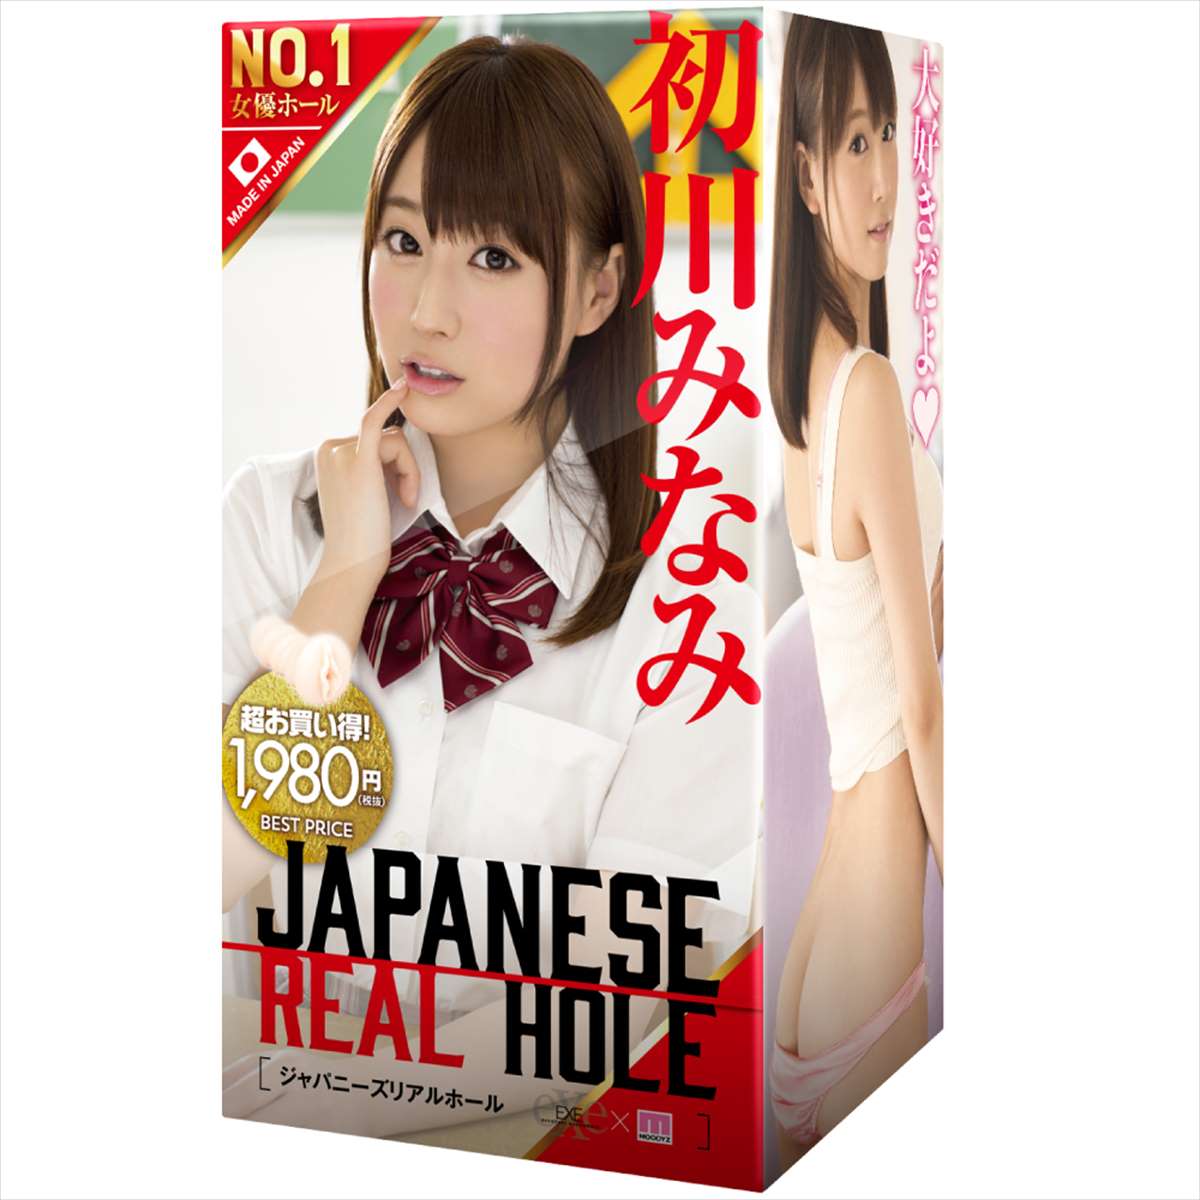 JAPANESE REAL HOLE 初川みなみ